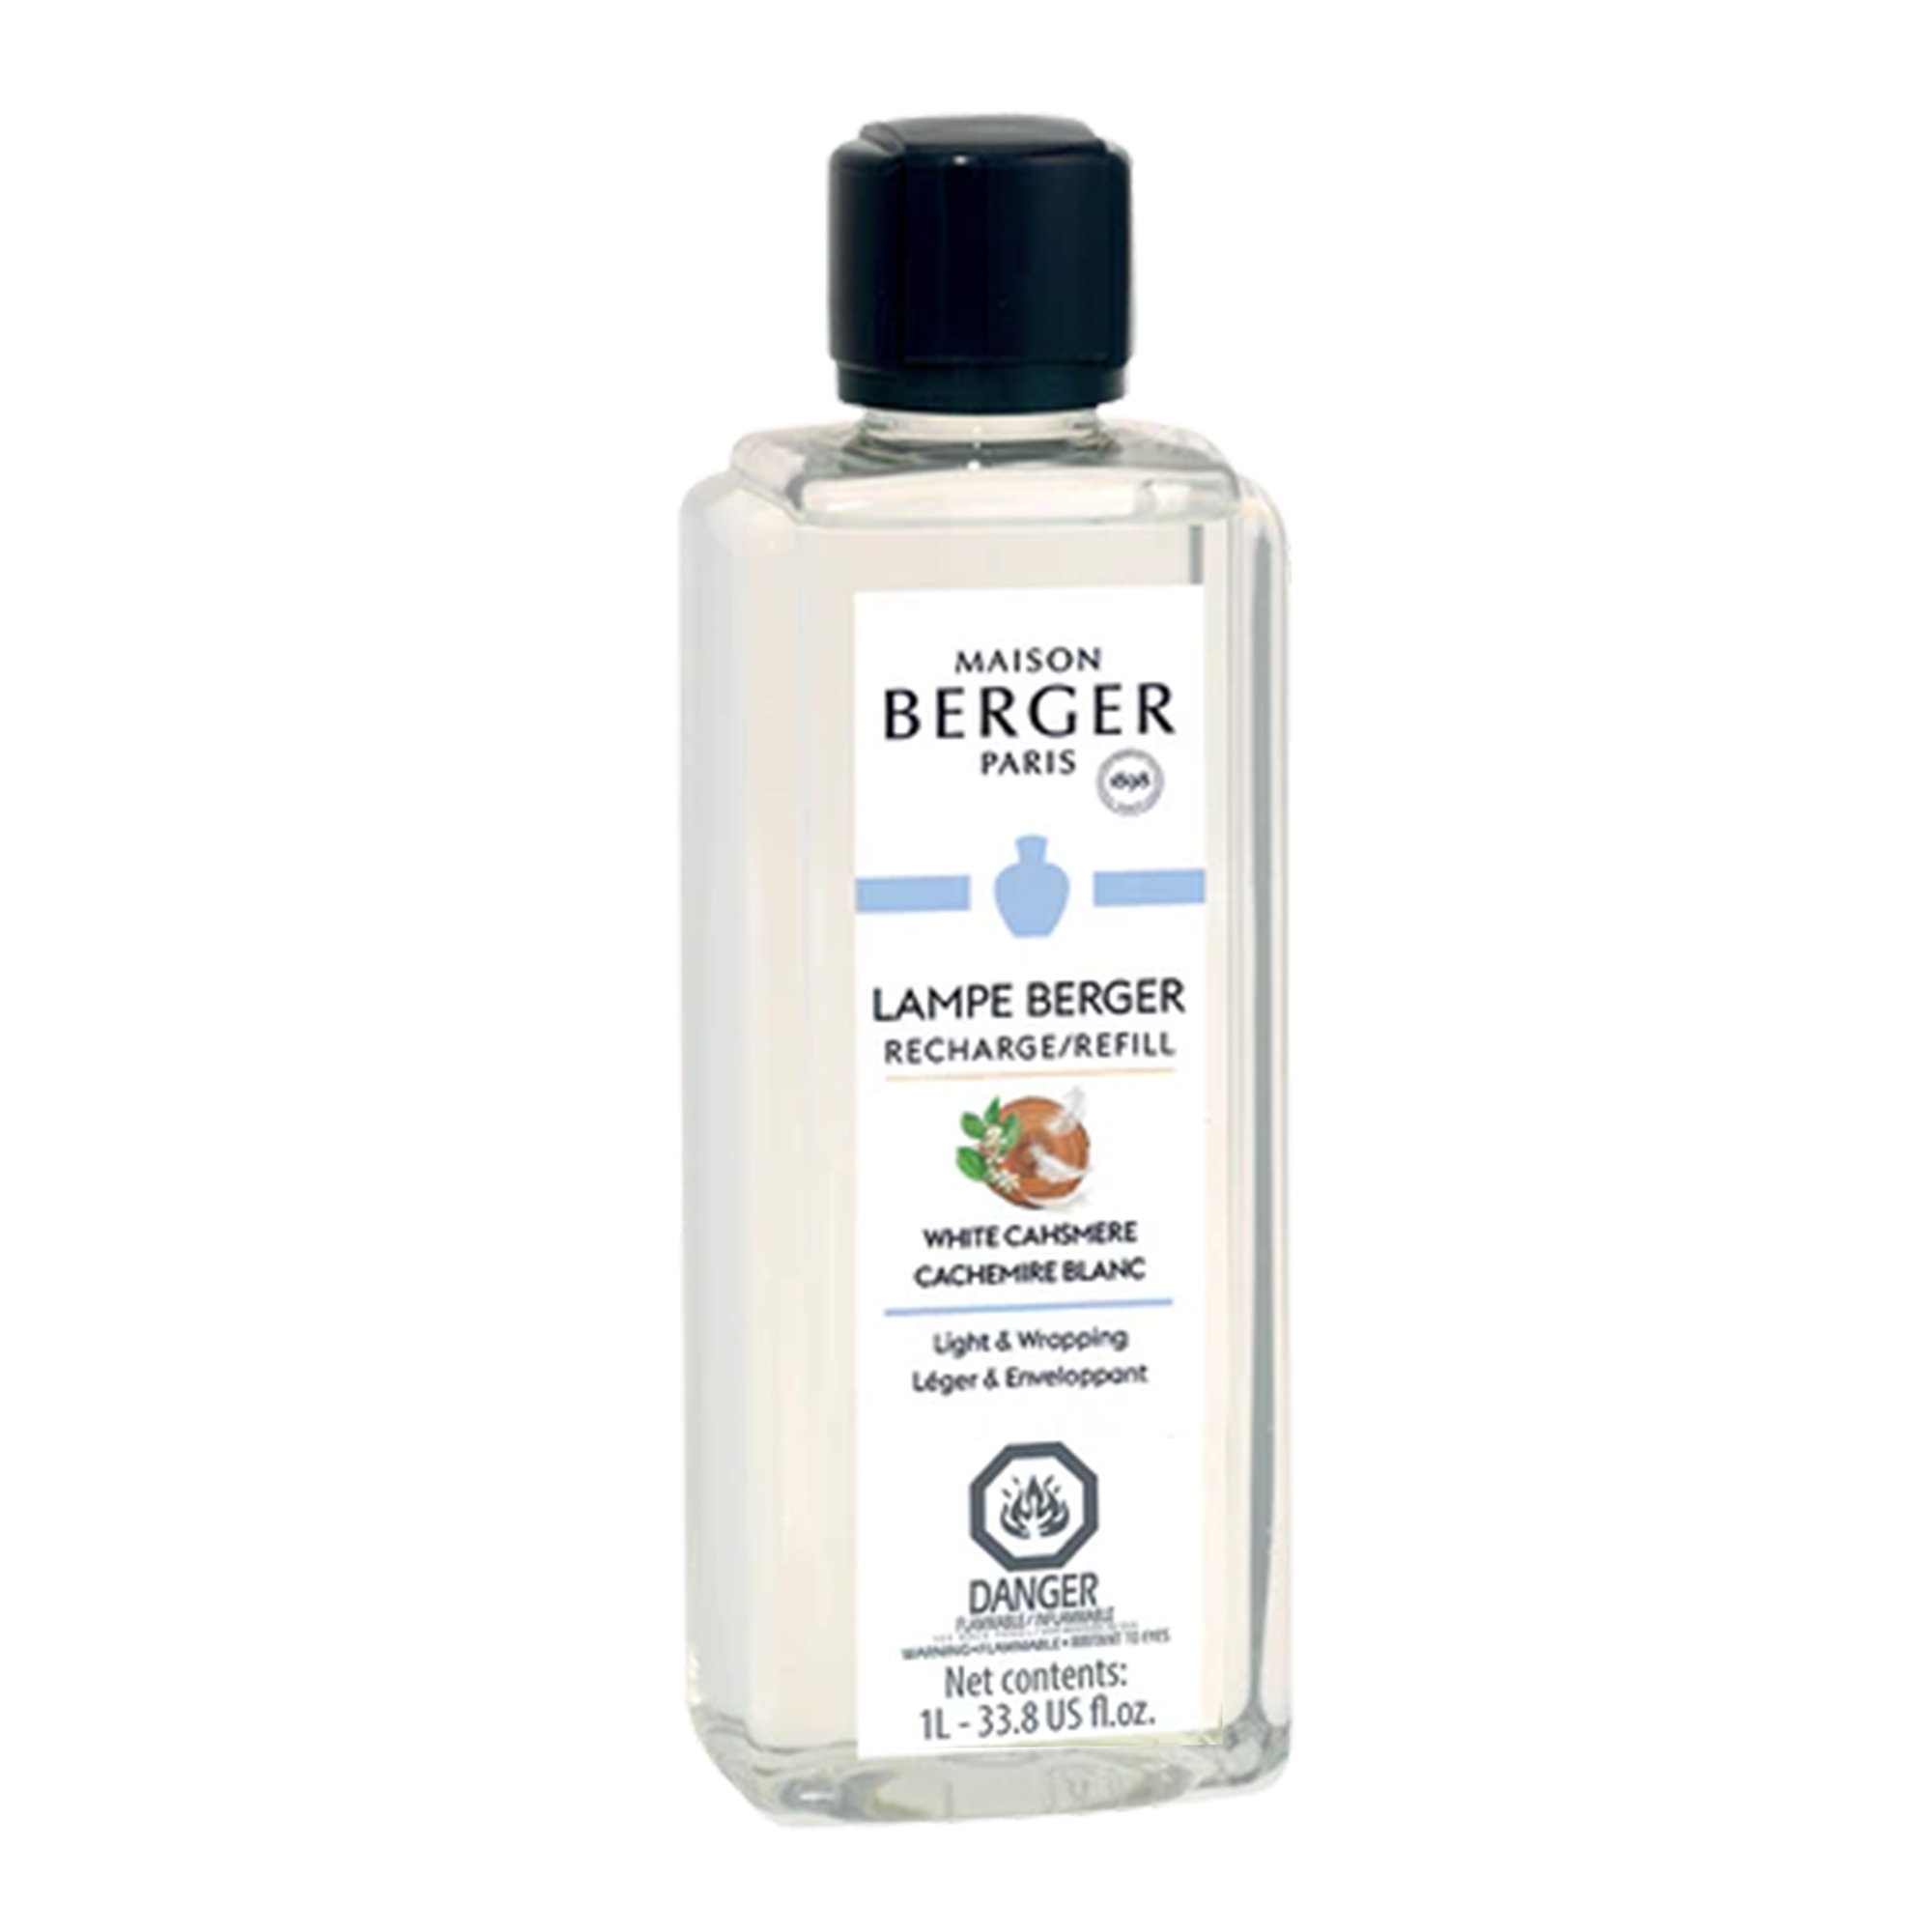 A bottle of Lampe Berger White Cashmere fragrance oil in 500ml size, featuring a label with the product name and branding. The bottle is a frosted white color with a narrow neck and a black cap.